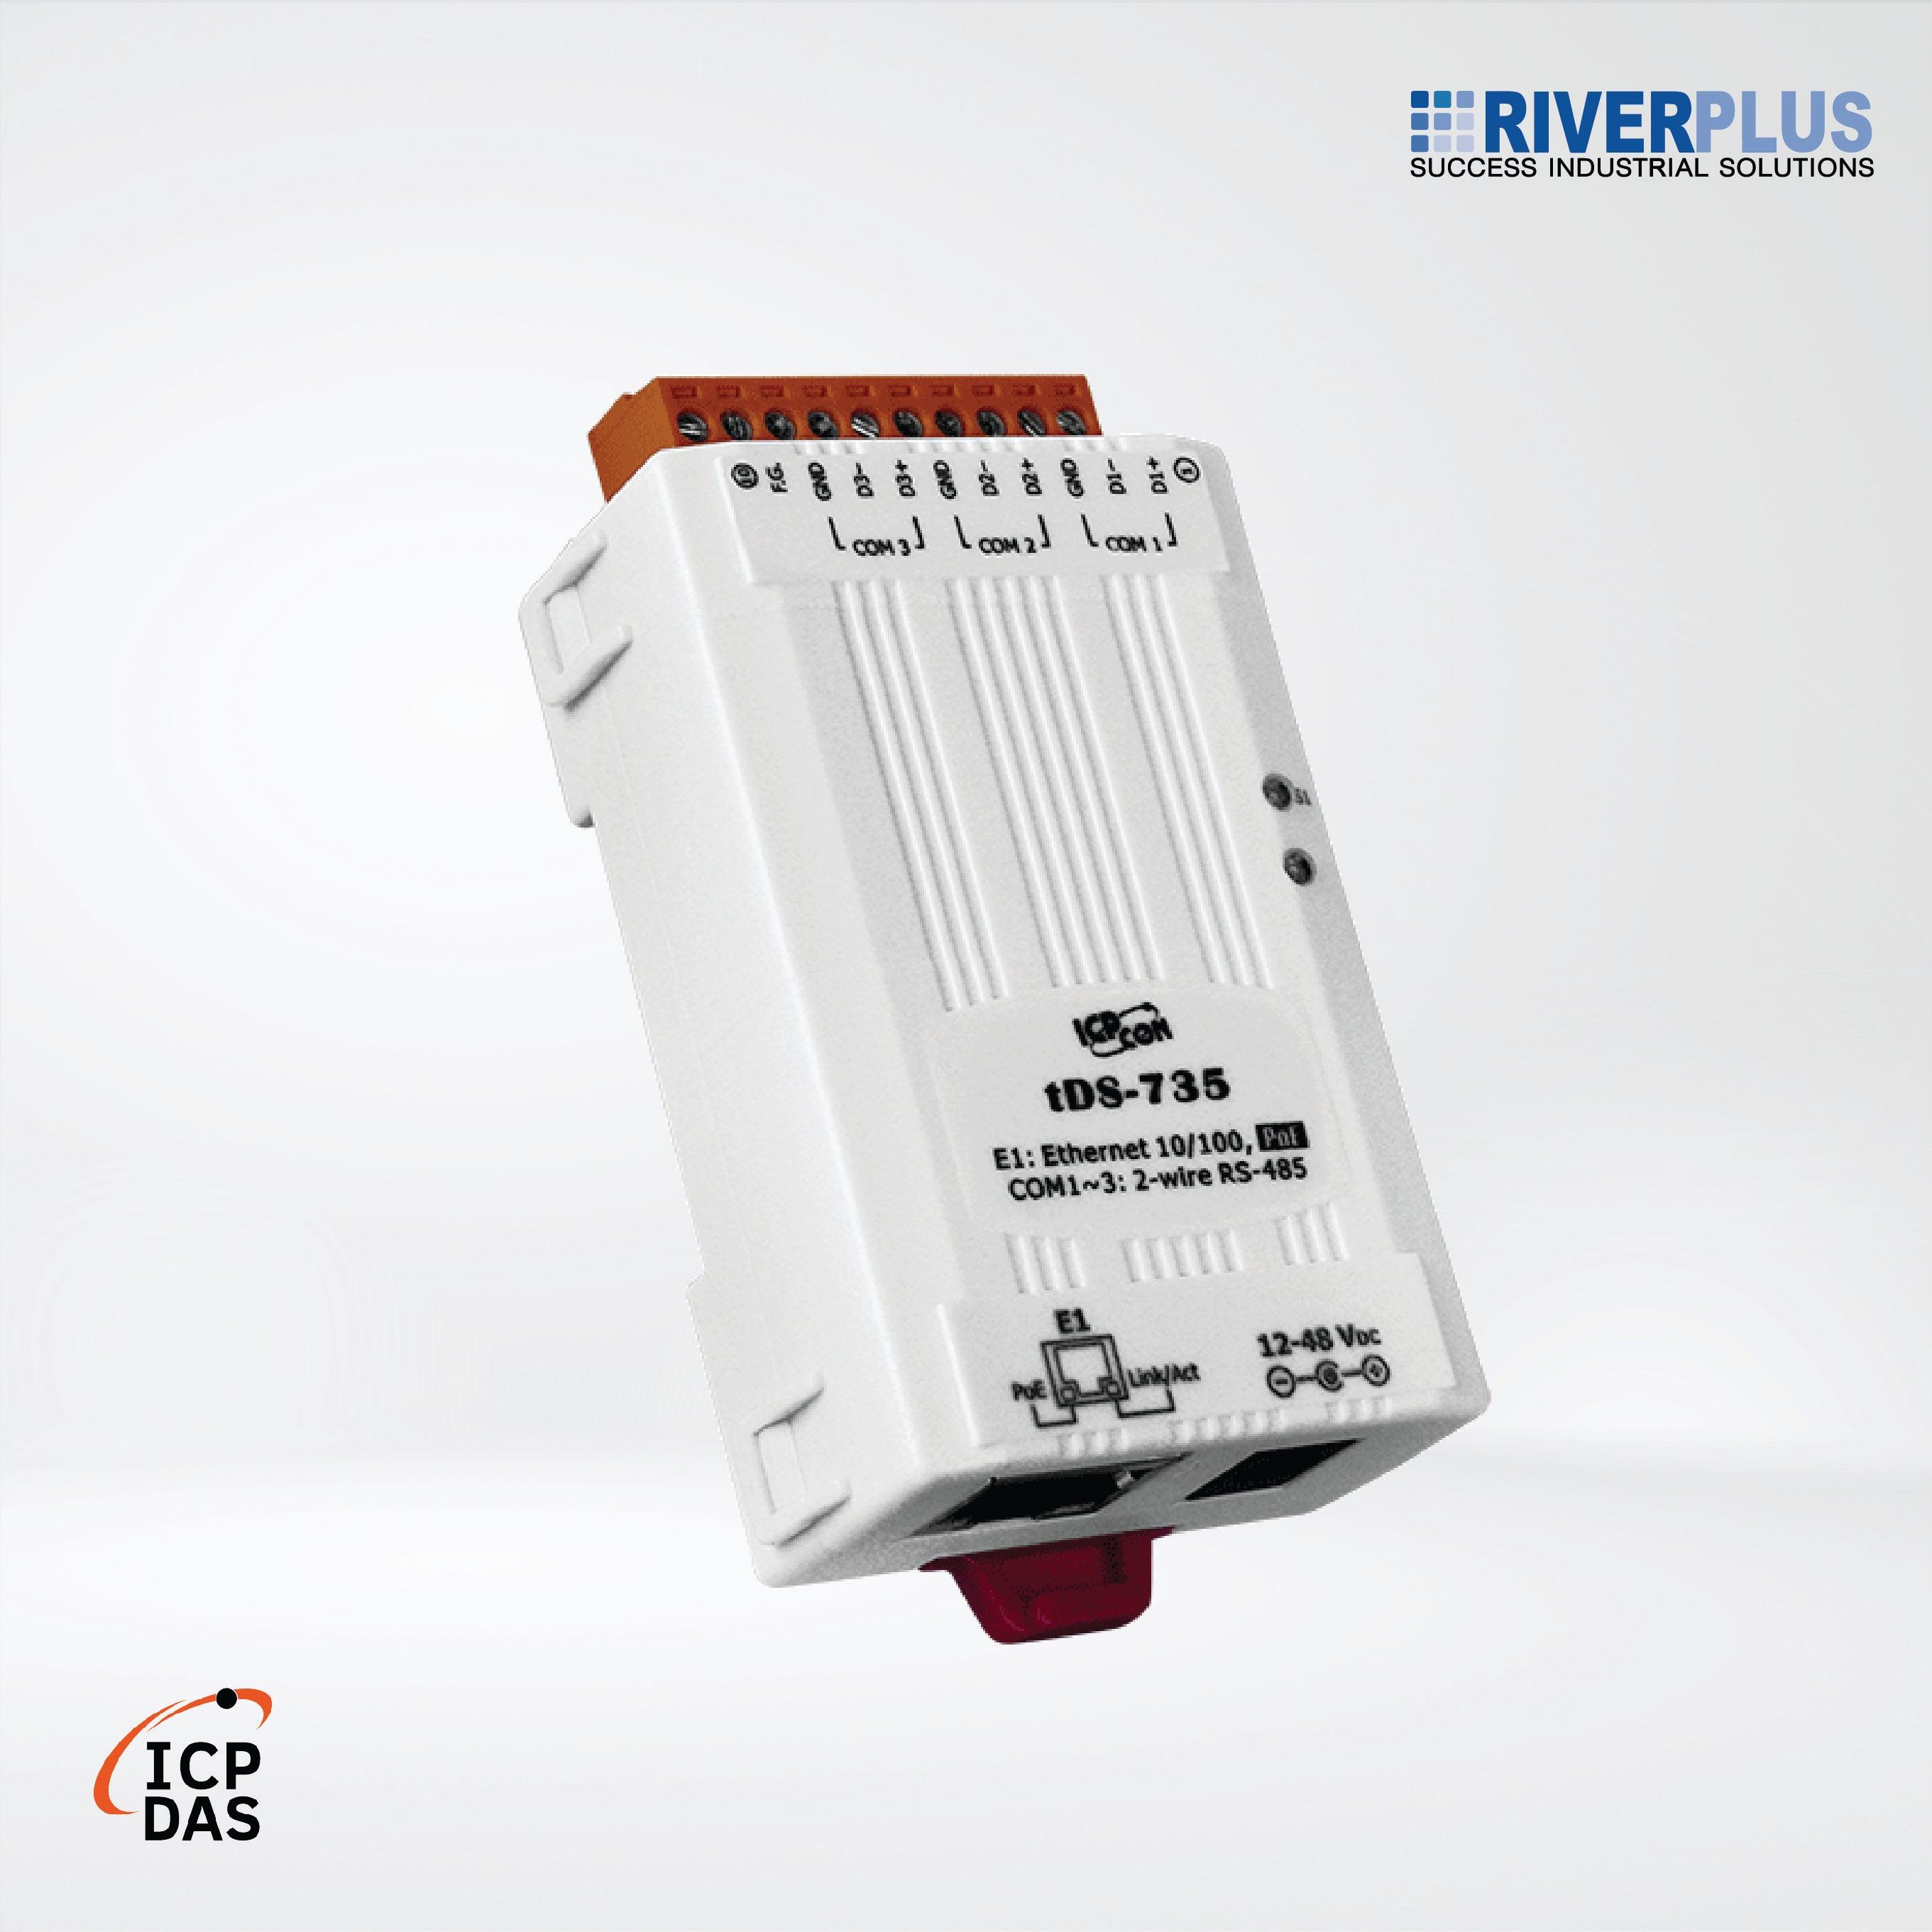 tDS-735 CR Tiny (3x RS-485) Serial-to-Ethernet Device Server with PoE - Riverplus